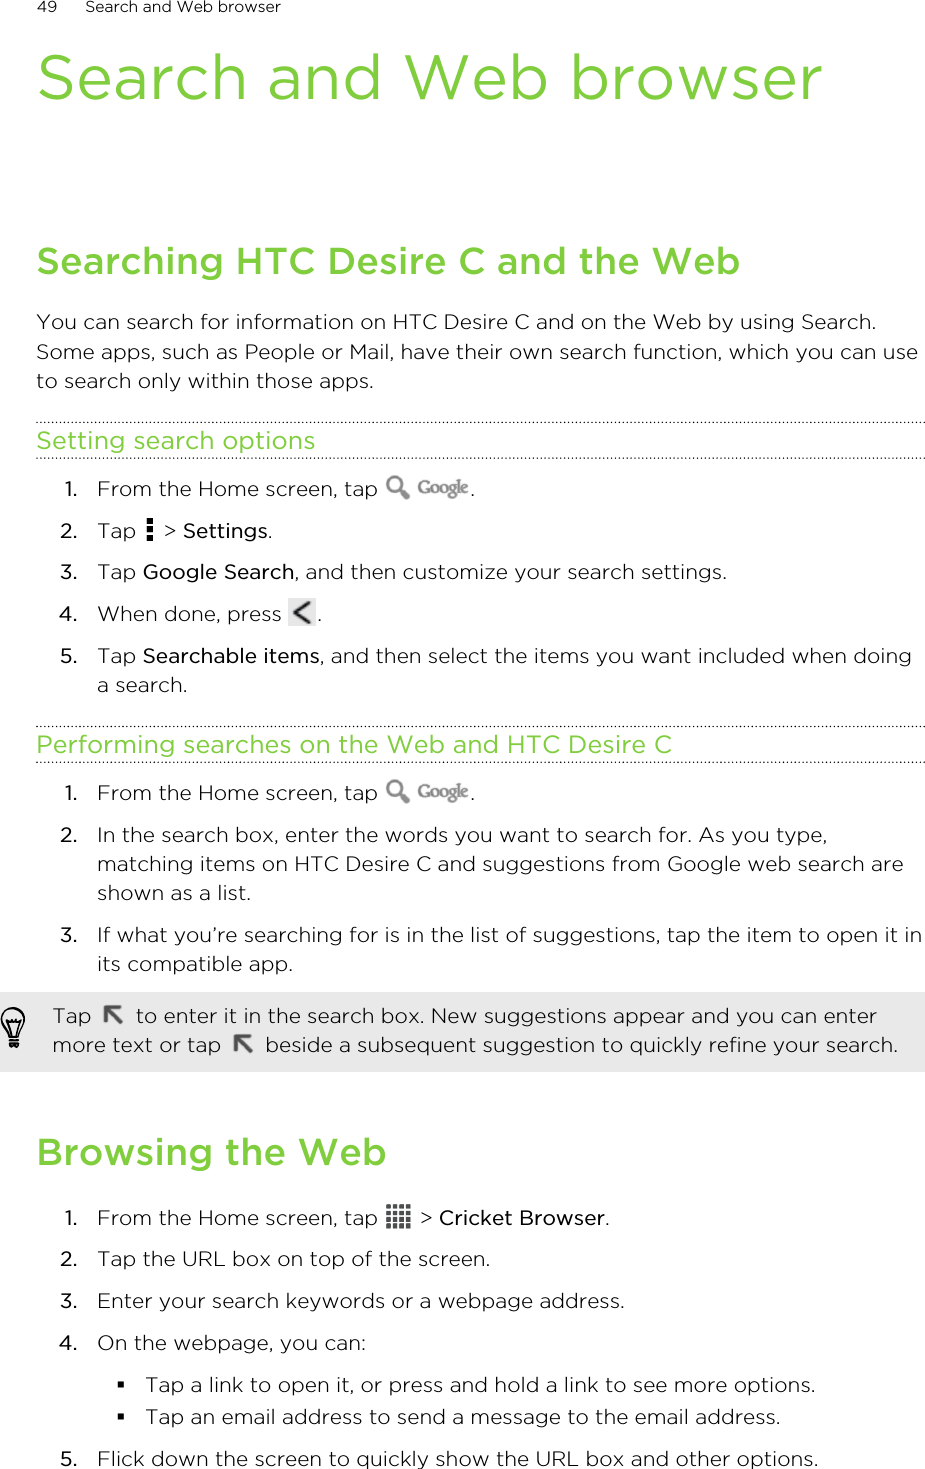 Search and Web browserSearching HTC Desire C and the WebYou can search for information on HTC Desire C and on the Web by using Search.Some apps, such as People or Mail, have their own search function, which you can useto search only within those apps.Setting search options1. From the Home screen, tap  .2. Tap   &gt; Settings.3. Tap Google Search, and then customize your search settings.4. When done, press  .5. Tap Searchable items, and then select the items you want included when doinga search.Performing searches on the Web and HTC Desire C1. From the Home screen, tap  .2. In the search box, enter the words you want to search for. As you type,matching items on HTC Desire C and suggestions from Google web search areshown as a list.3. If what you’re searching for is in the list of suggestions, tap the item to open it inits compatible app. Tap   to enter it in the search box. New suggestions appear and you can entermore text or tap   beside a subsequent suggestion to quickly refine your search.Browsing the Web1. From the Home screen, tap   &gt; Cricket Browser.2. Tap the URL box on top of the screen.3. Enter your search keywords or a webpage address.4. On the webpage, you can:§Tap a link to open it, or press and hold a link to see more options.§Tap an email address to send a message to the email address.5. Flick down the screen to quickly show the URL box and other options.49 Search and Web browser